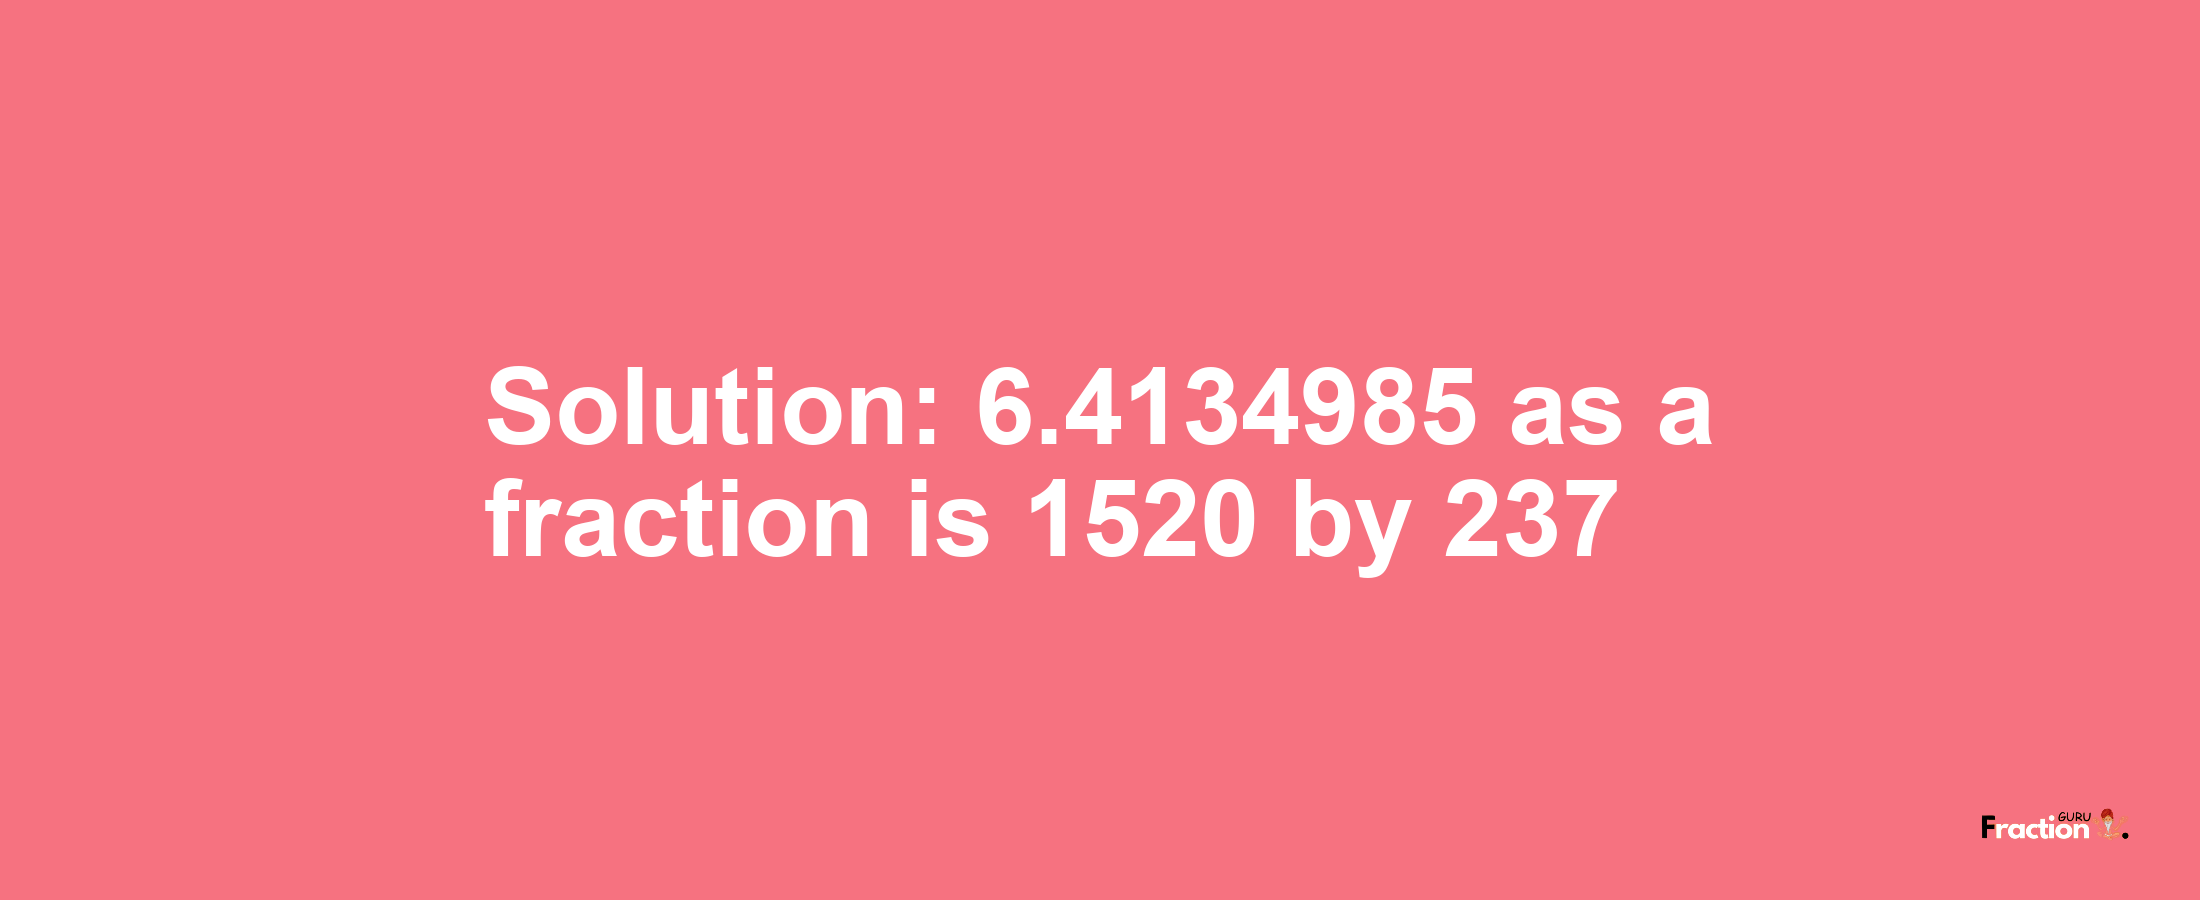 Solution:6.4134985 as a fraction is 1520/237